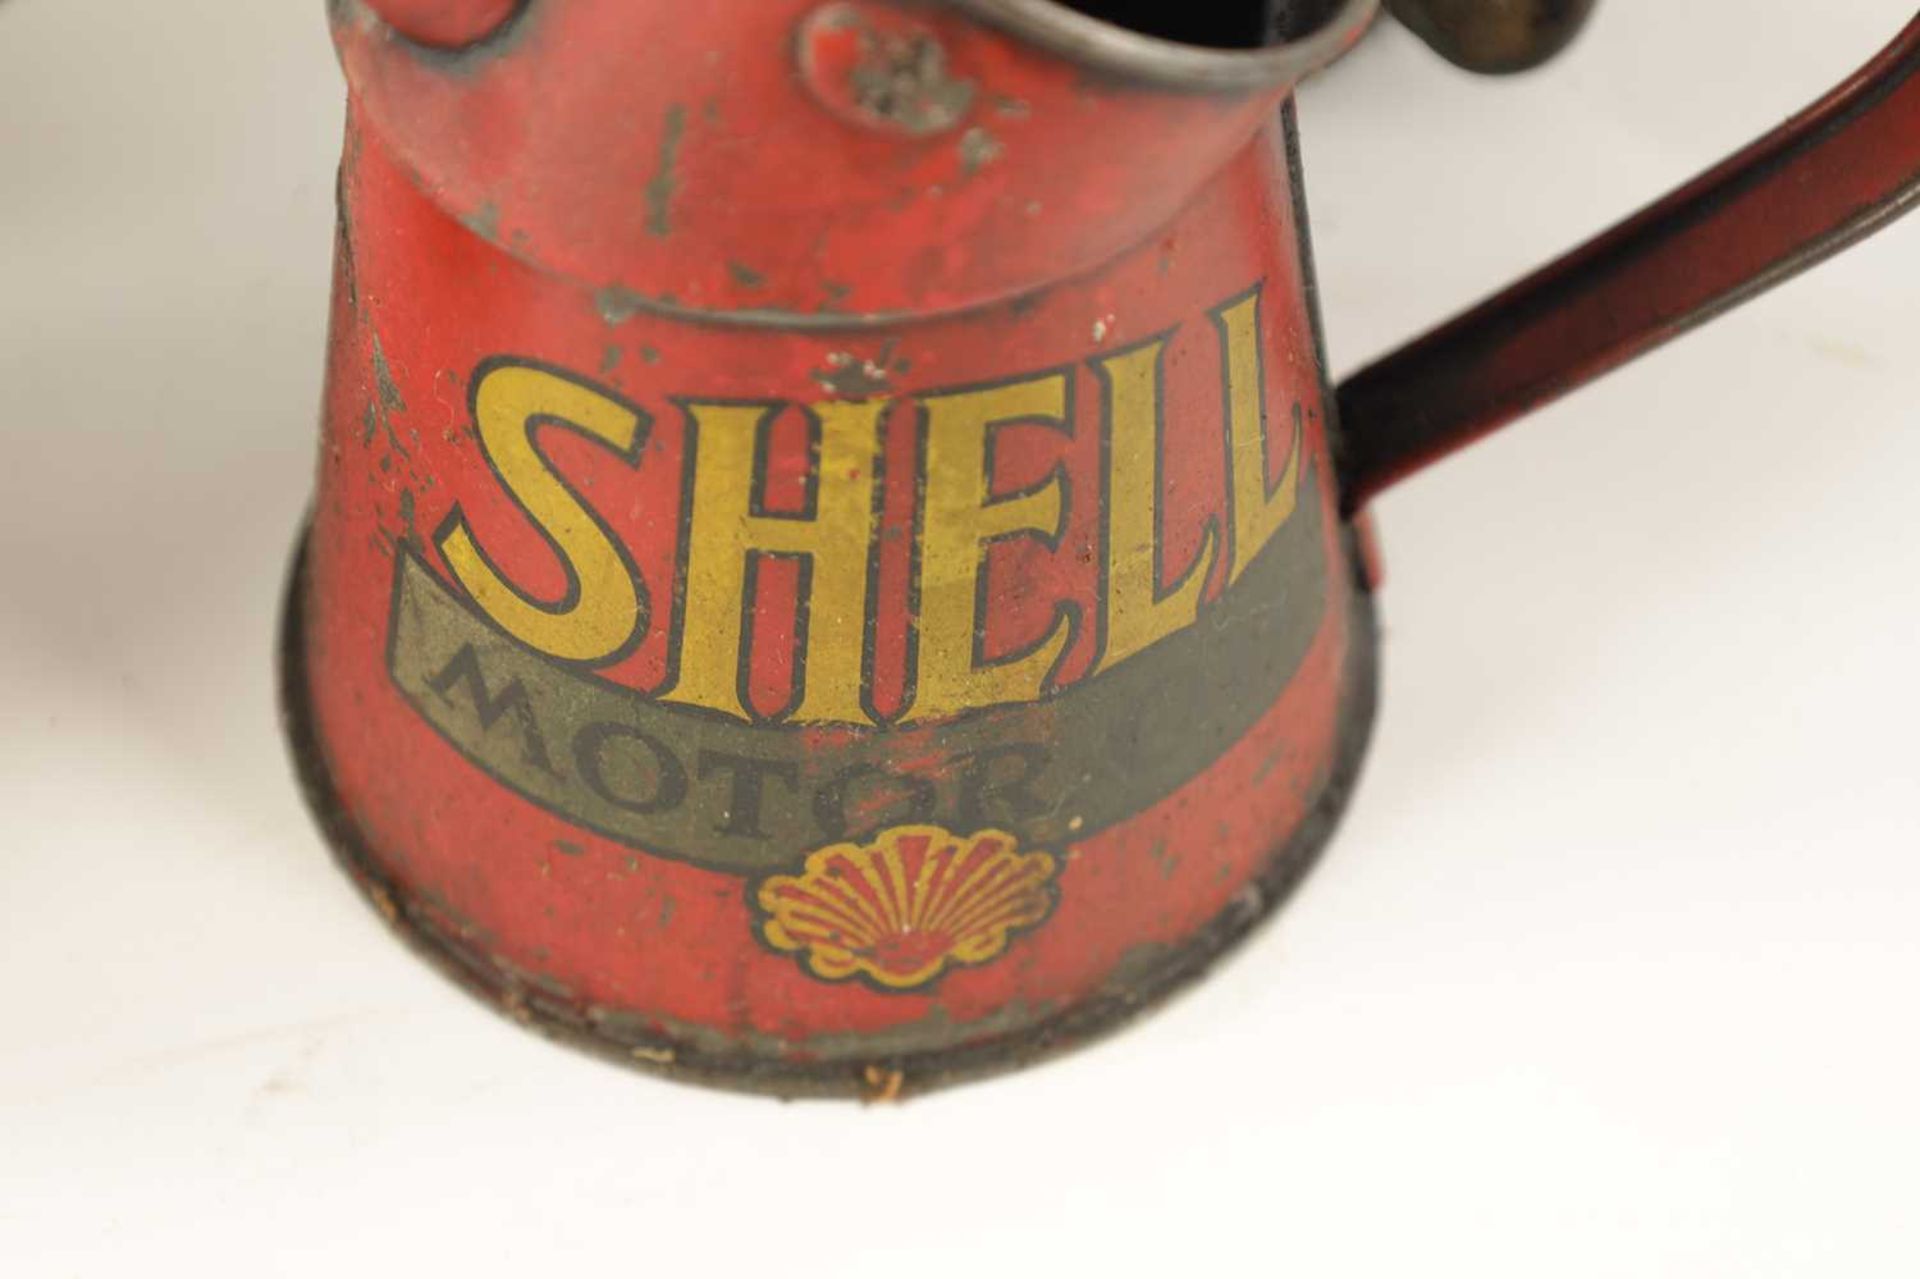 A COLLECTION OF FIVE VINTAGE MOTOR OIL CANS - Image 6 of 8